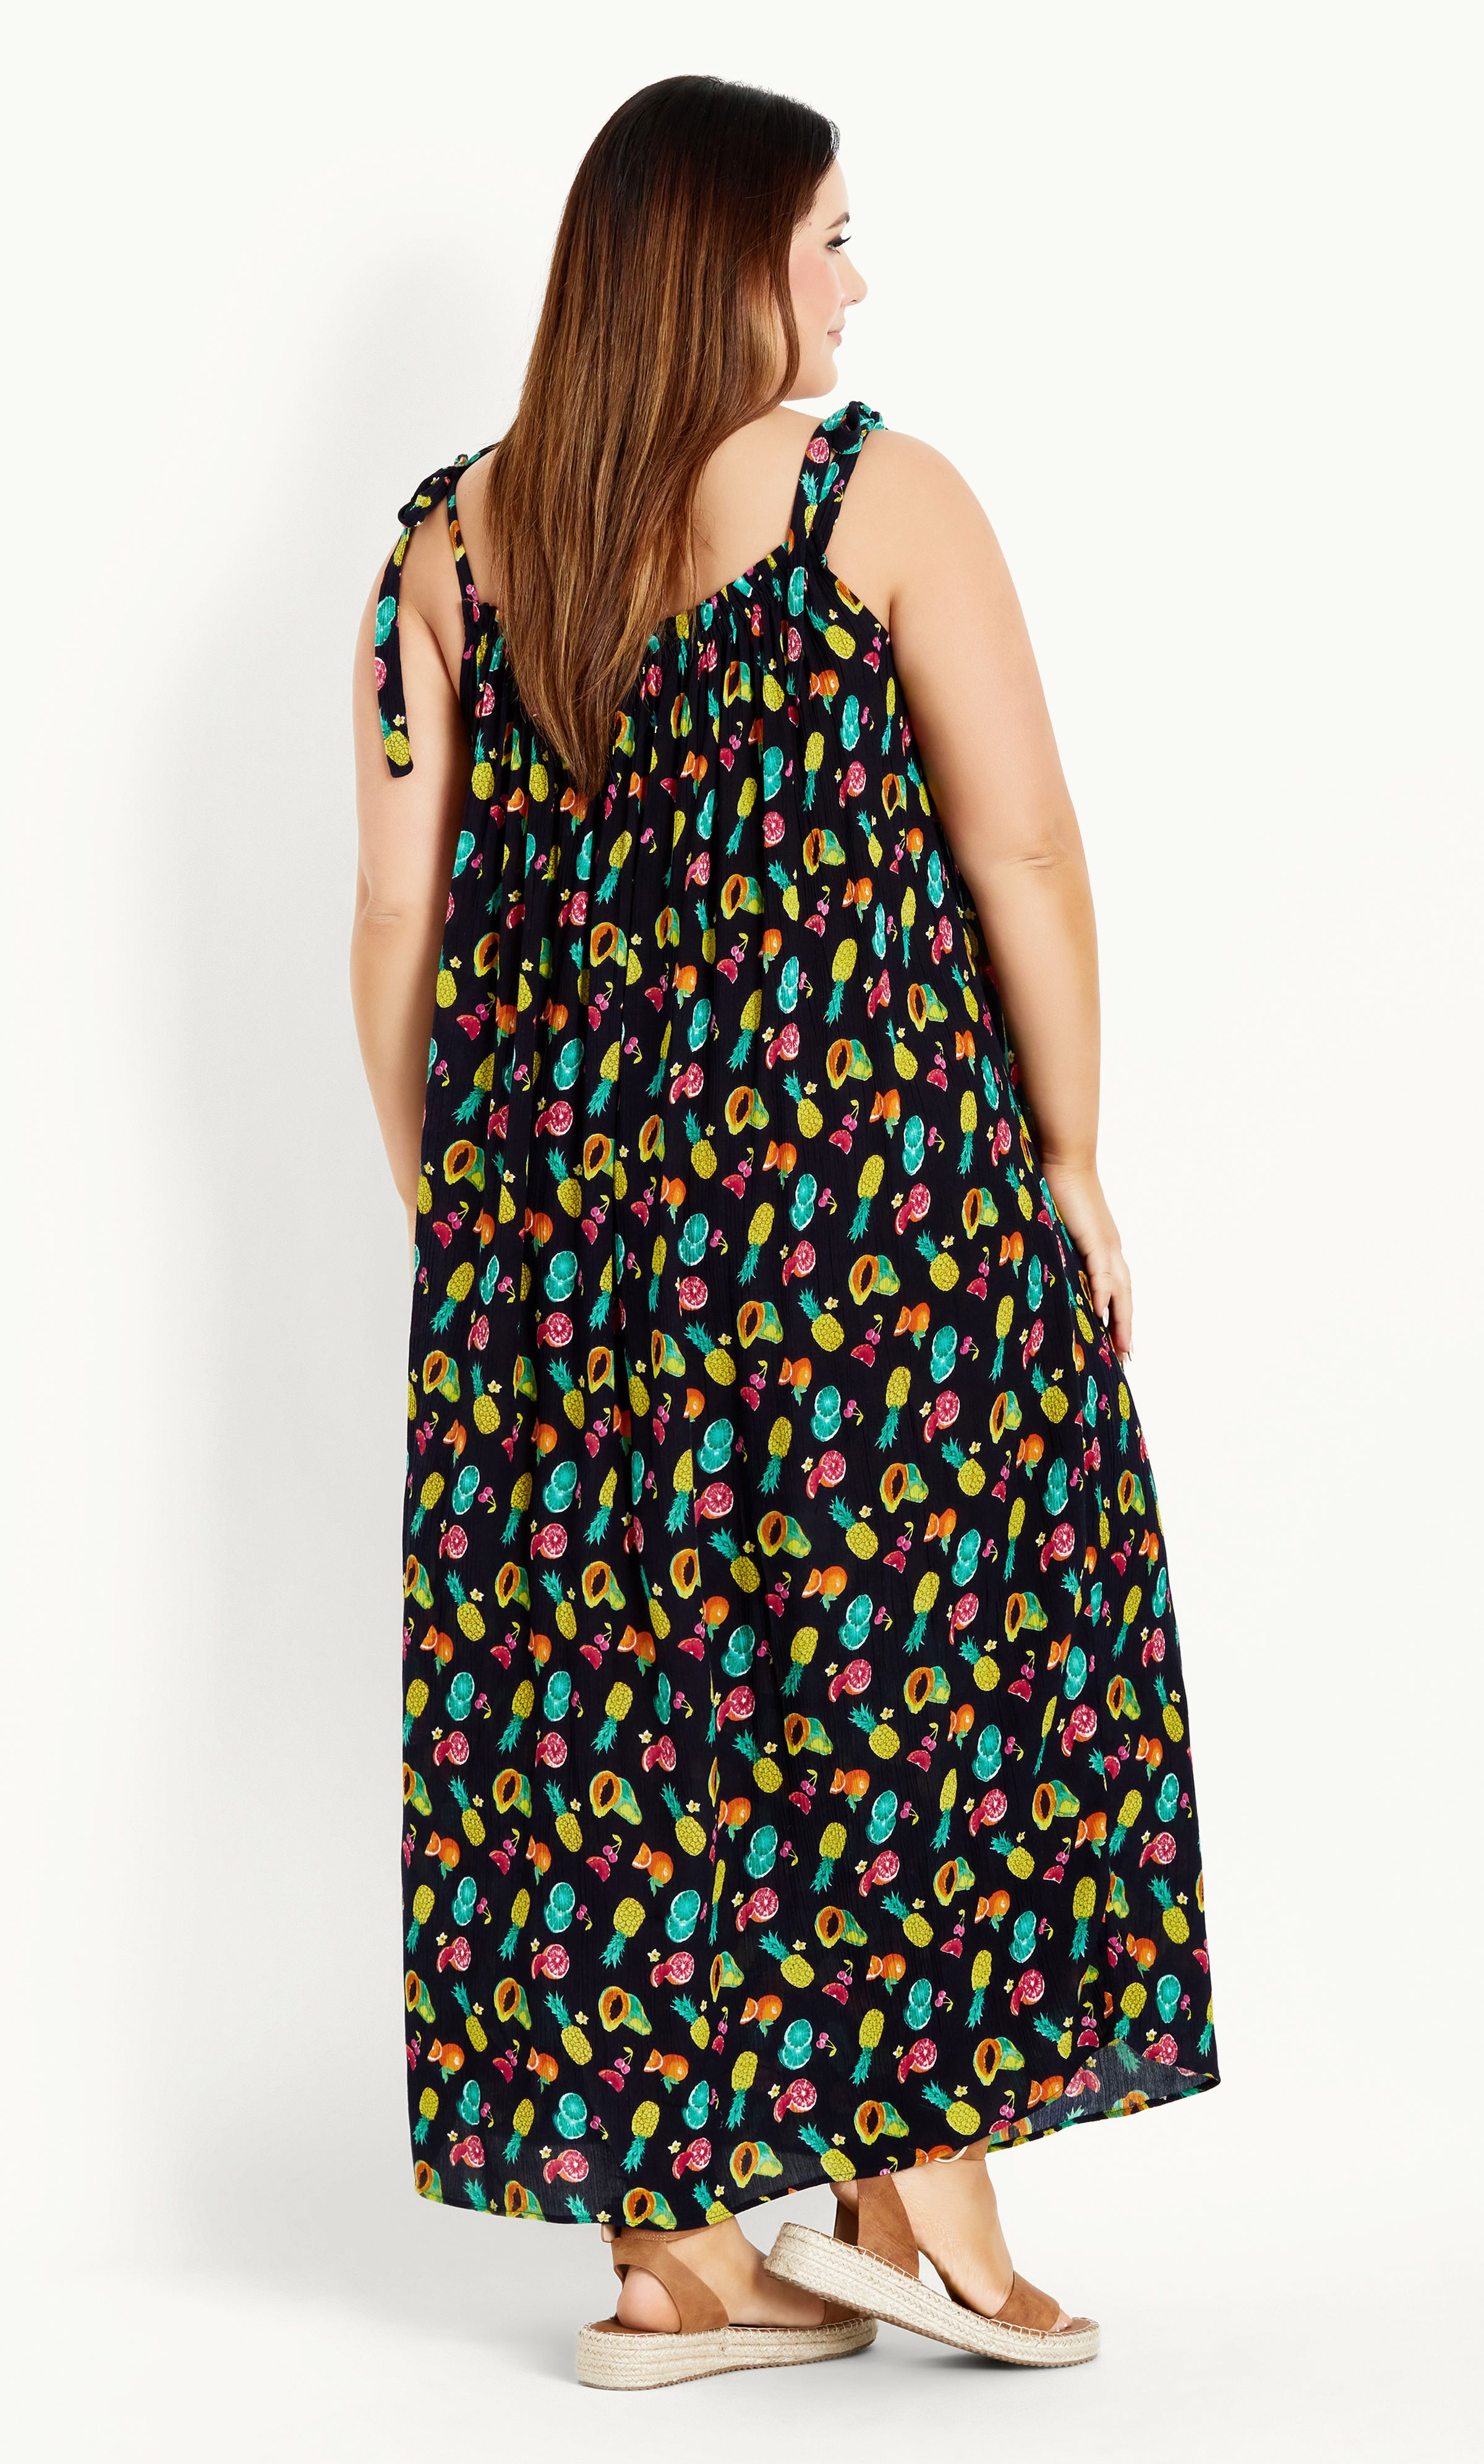 The Tie Shoulder Dress features a super cute fruit print and comfortable relaxed fit, perfect for soaking up the sunshine in style. Featuring tie shoulder straps for added feminine flair, this dress is a stylish pick for beachside strolls and picnic dates. Key Features Include: - Straight elasticated neckline - Self-tie shoulder straps - Textured non-stretch fabrication - Relaxed fit - Pull over style - Unlined - Maxi length Complete the look with strappy black sandals and an oversized straw hat.